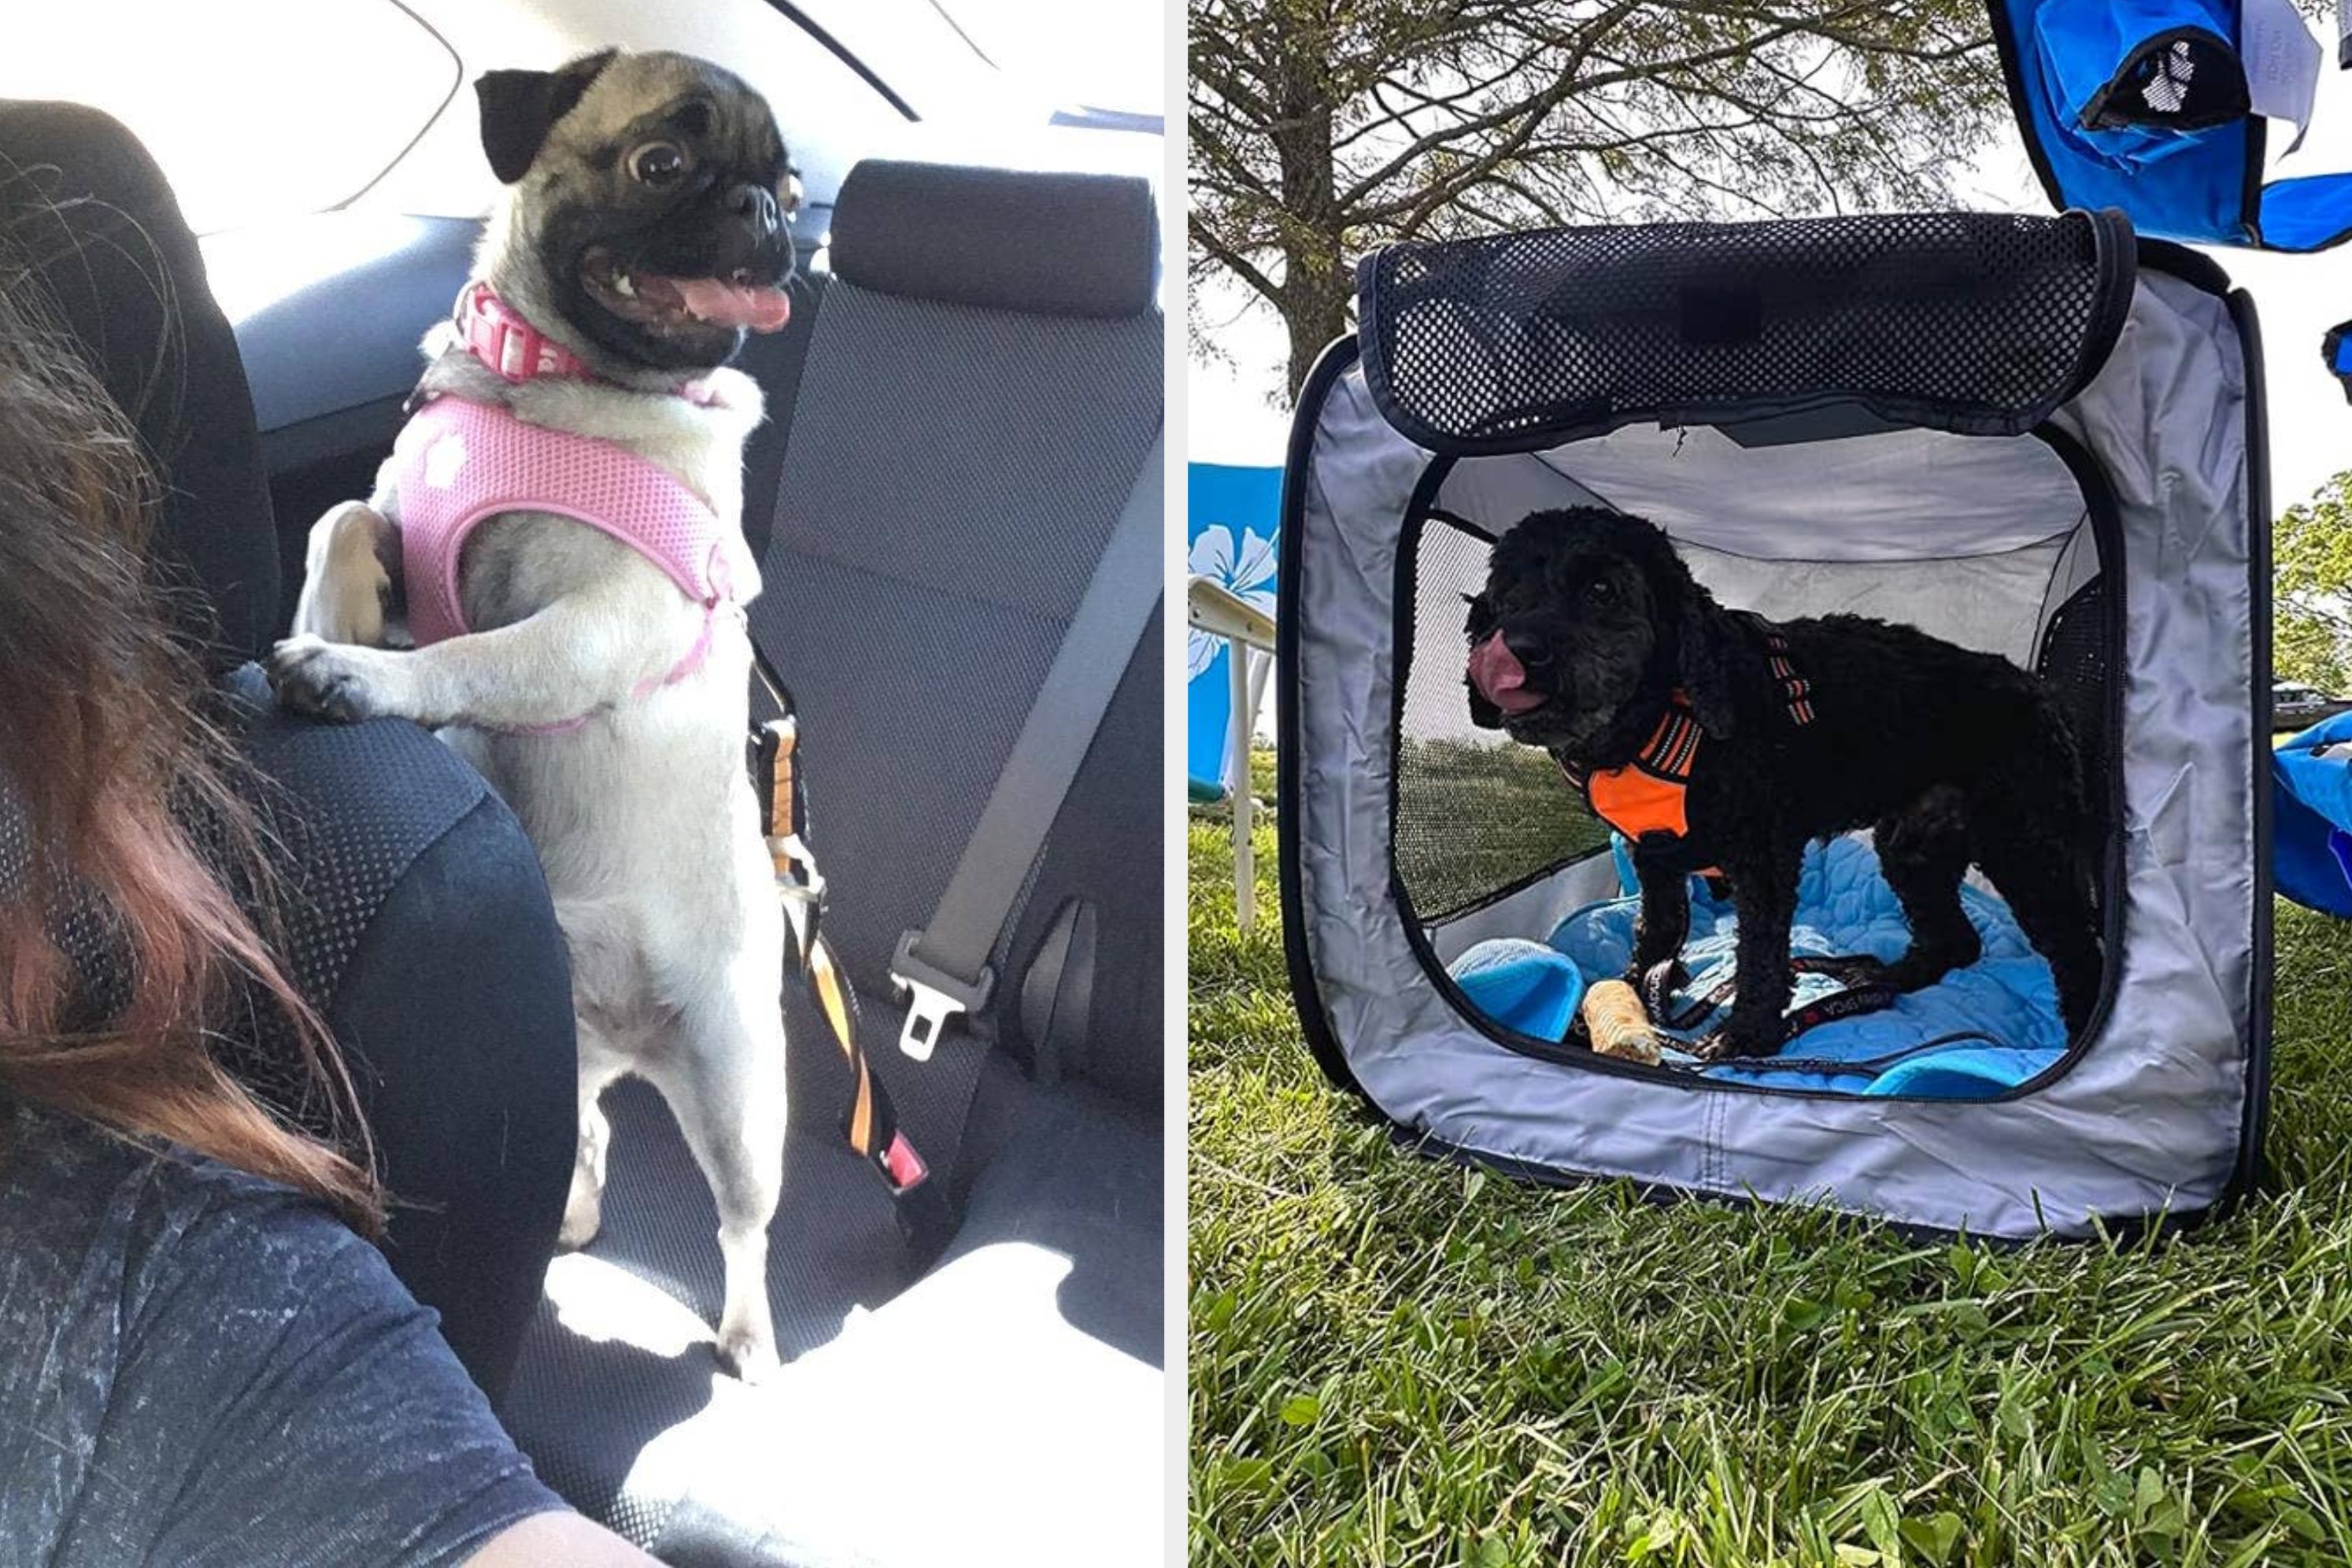 17 Useful Products For Anyone Who Plans To Take Their Dog With Them To As Many Places As Possible This Summer